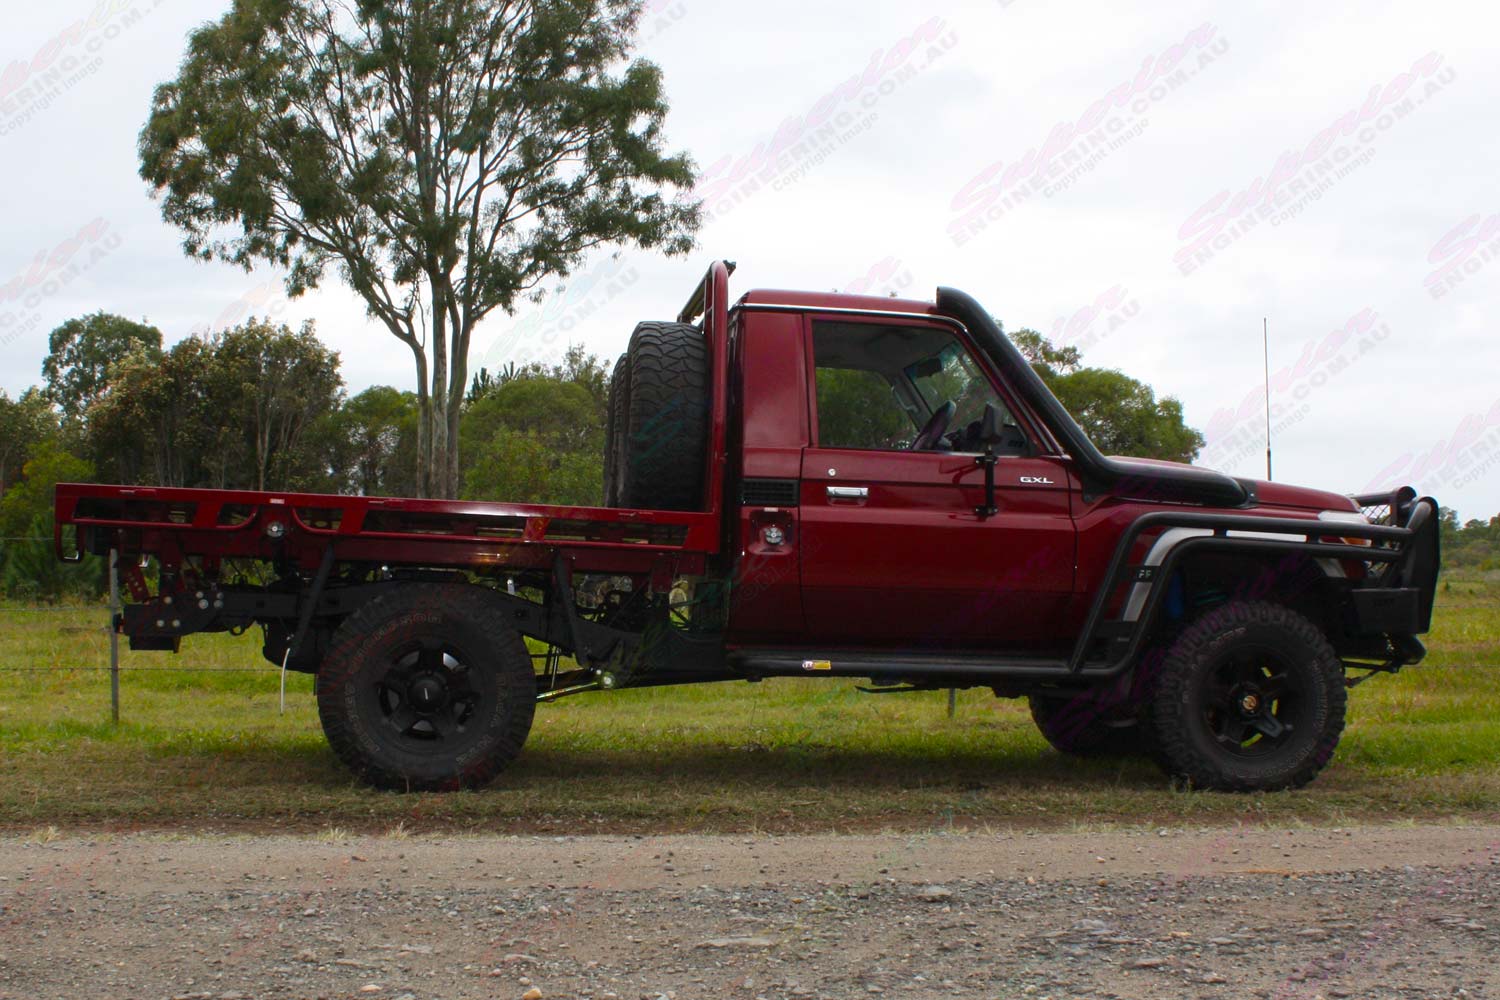 Right side view of a Maroon 79 Series Toyota Landcruiser (Single Cab) at Superior Engineering fitted out with a new rear coil conversion kit